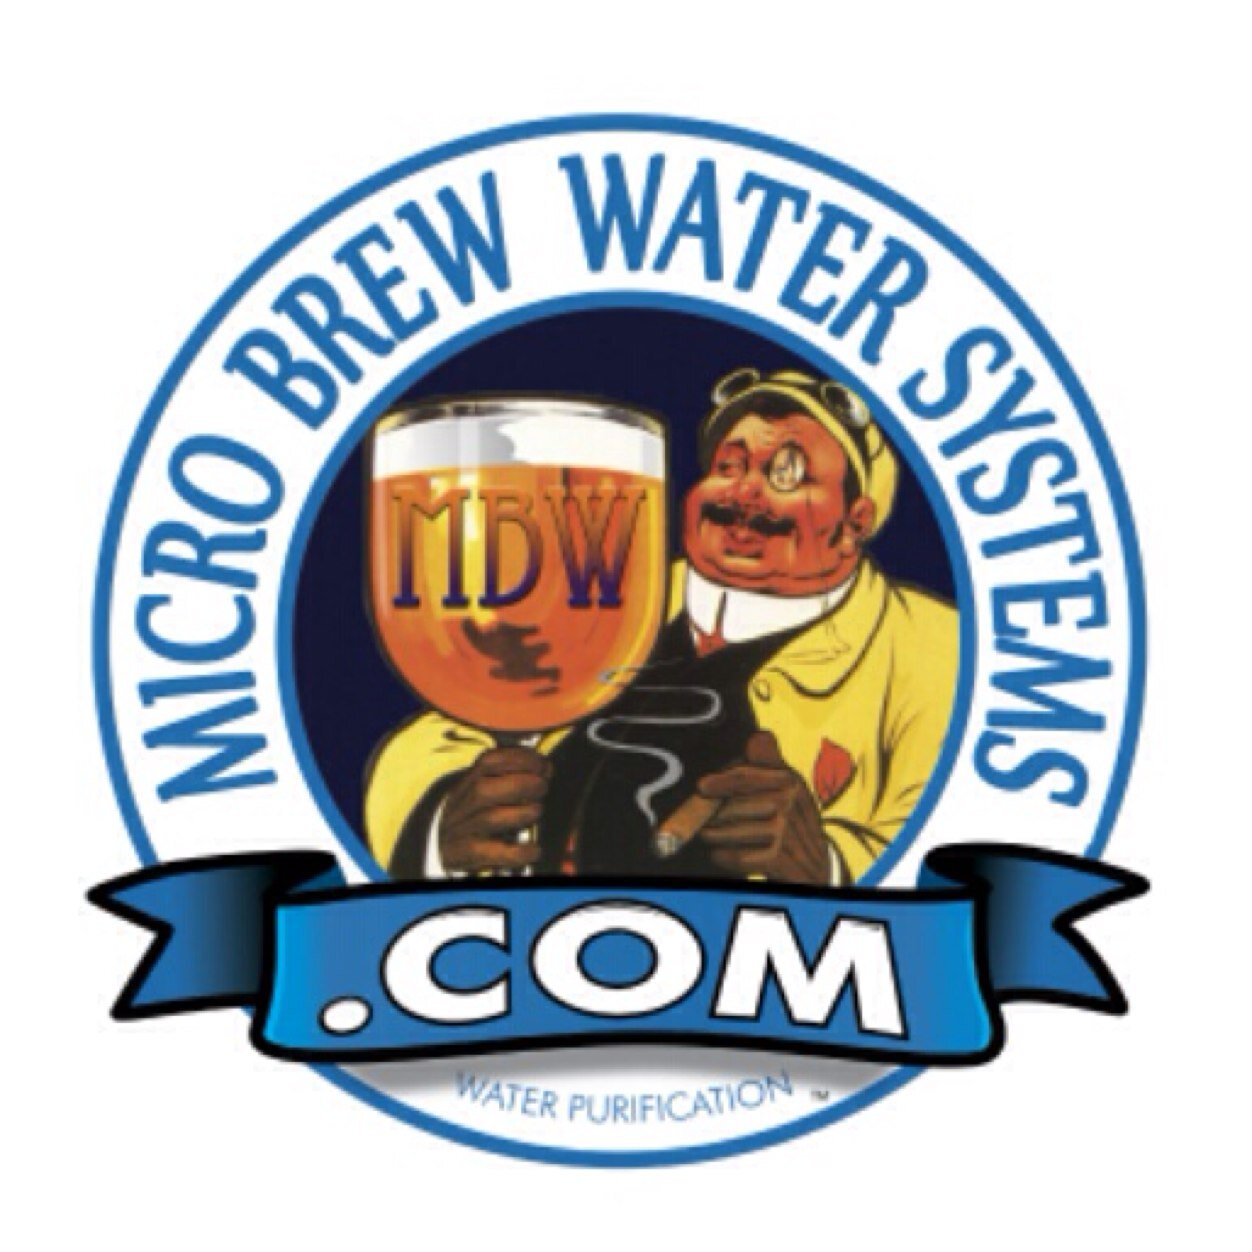 Specialized Water Purification and Filtration for Industrial Brewers, Micro Brewers, Craft Brewers, Distilleries, & Wineries worldwide. An Equipure Company.